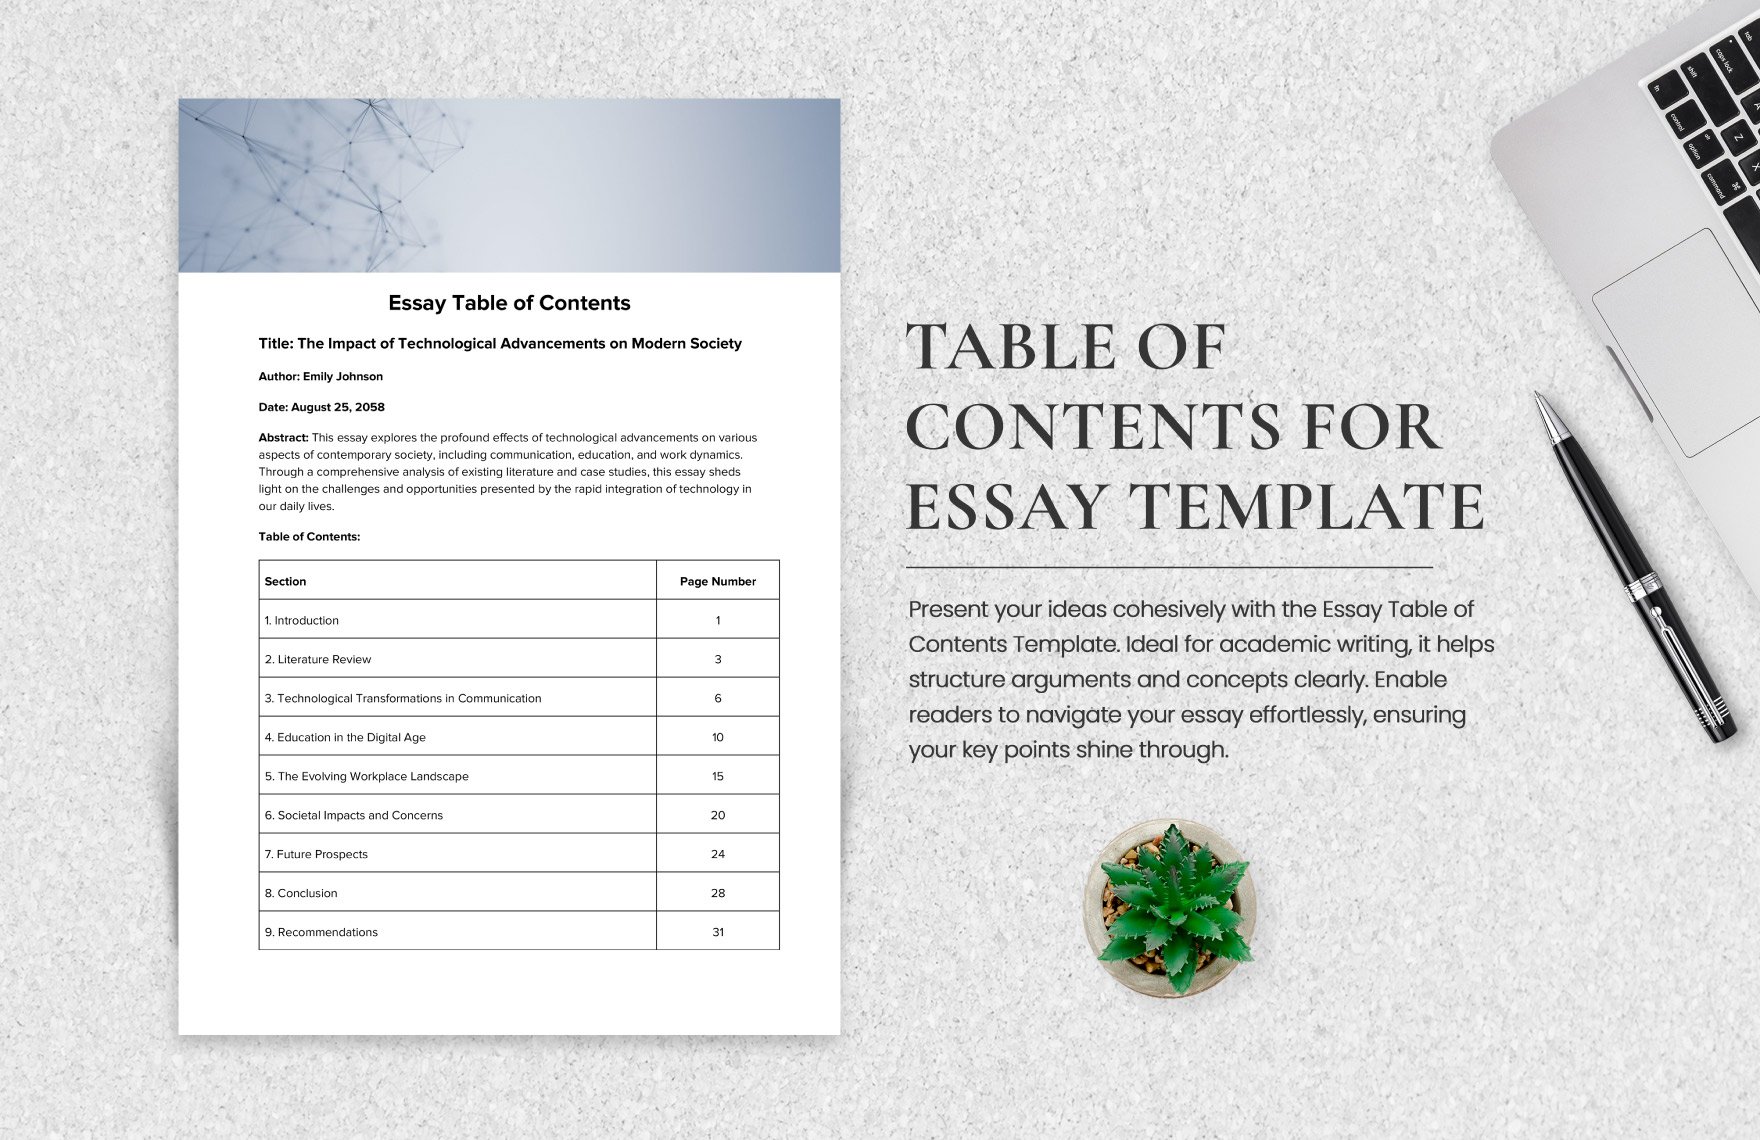 Free Essay Table of Contents Template in Word, Google Docs, PDF, Apple Pages, Publisher